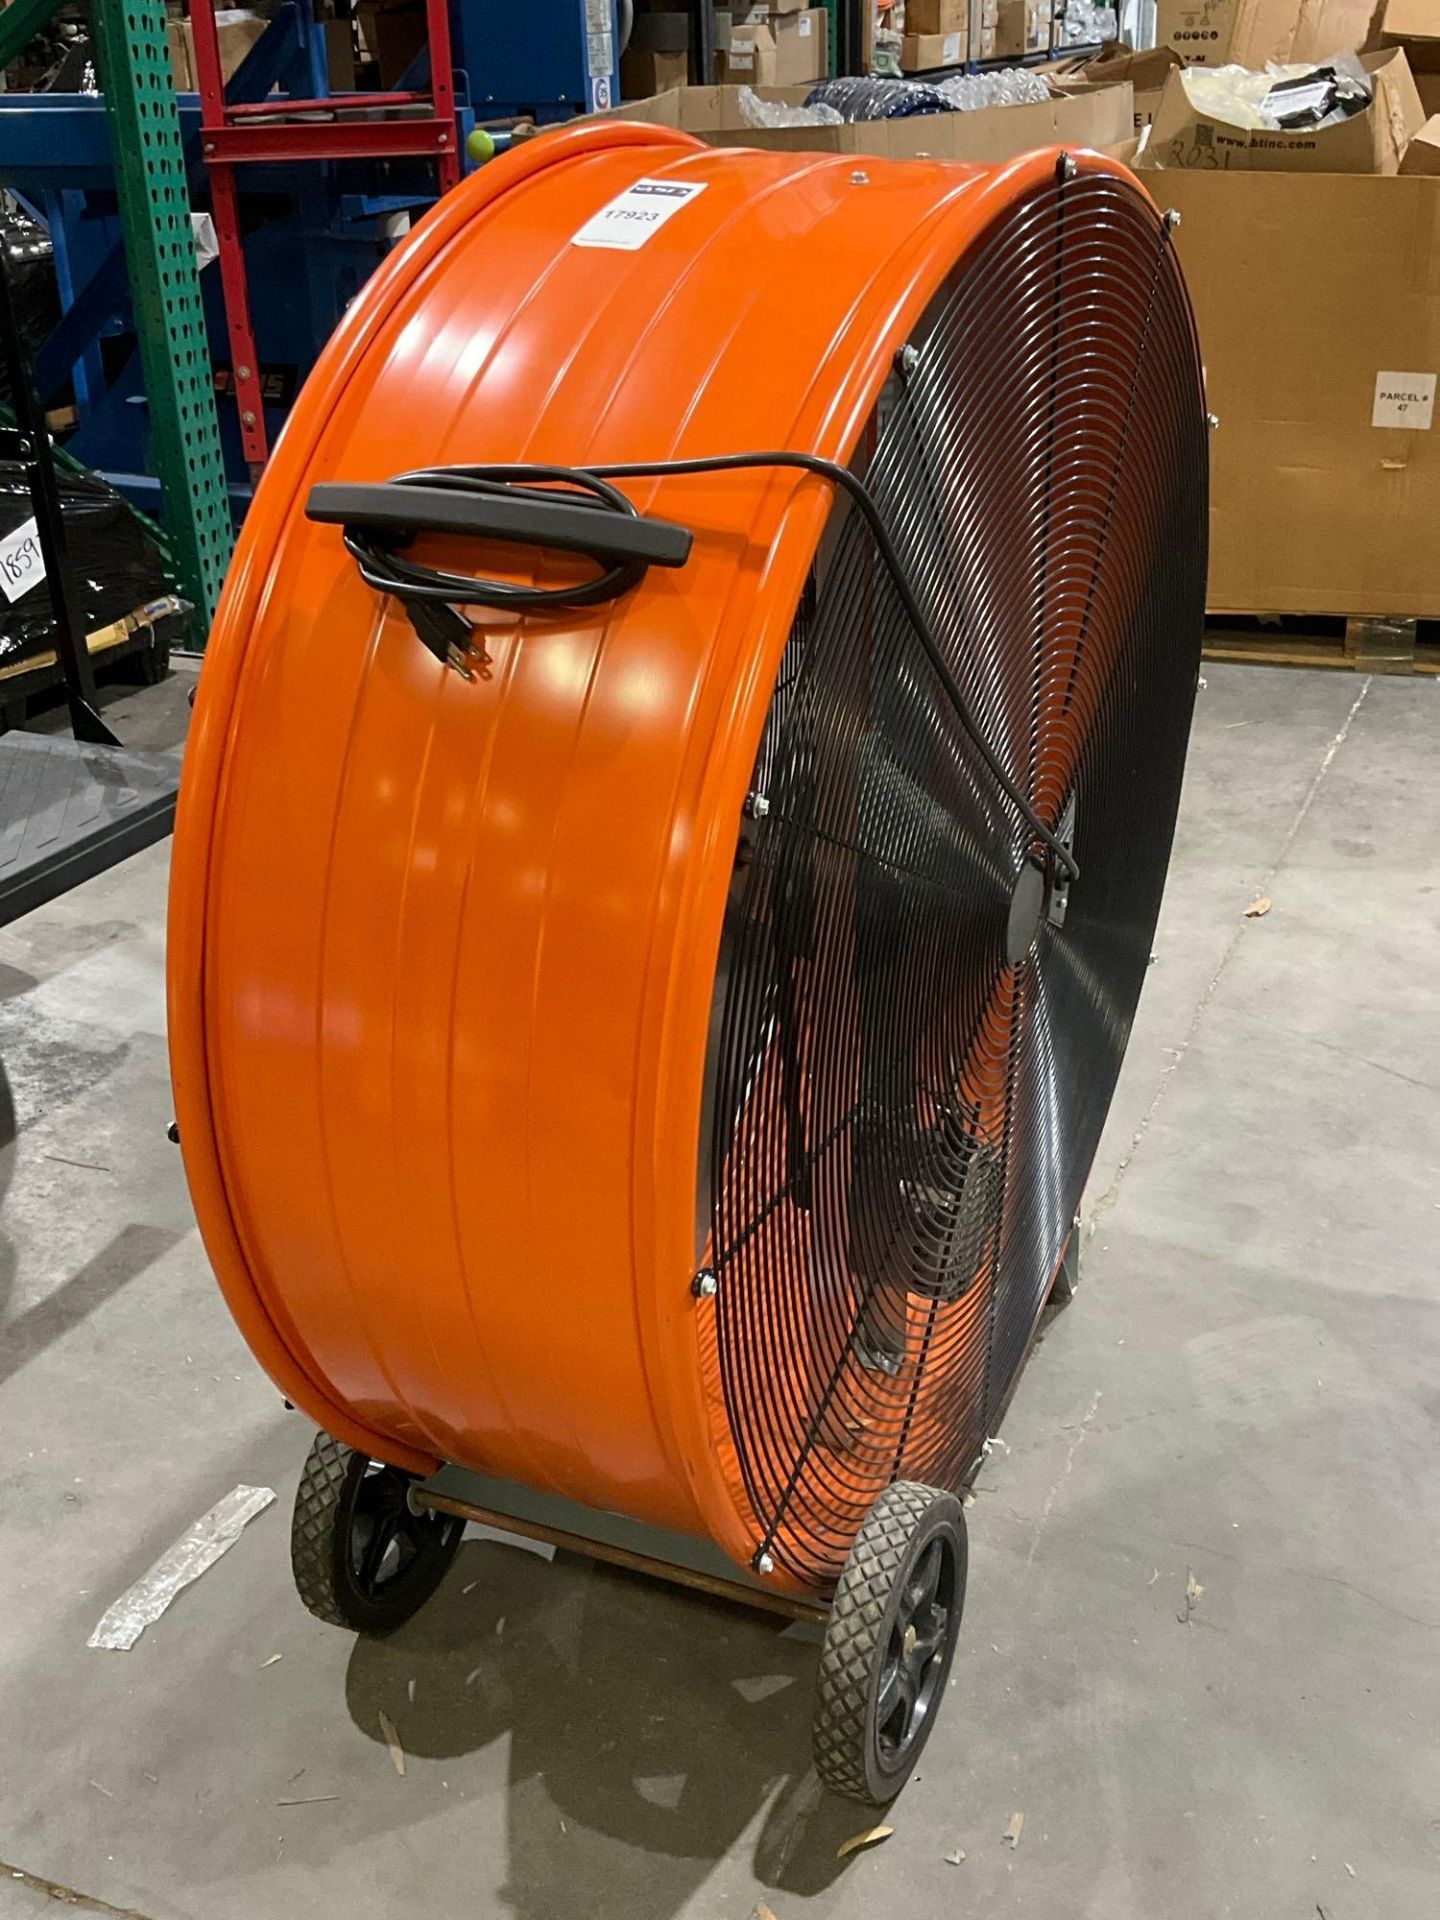 UNUSED 42" COMMERCIAL ELECTRIC PORTABLE BARREL FAN - Image 3 of 7